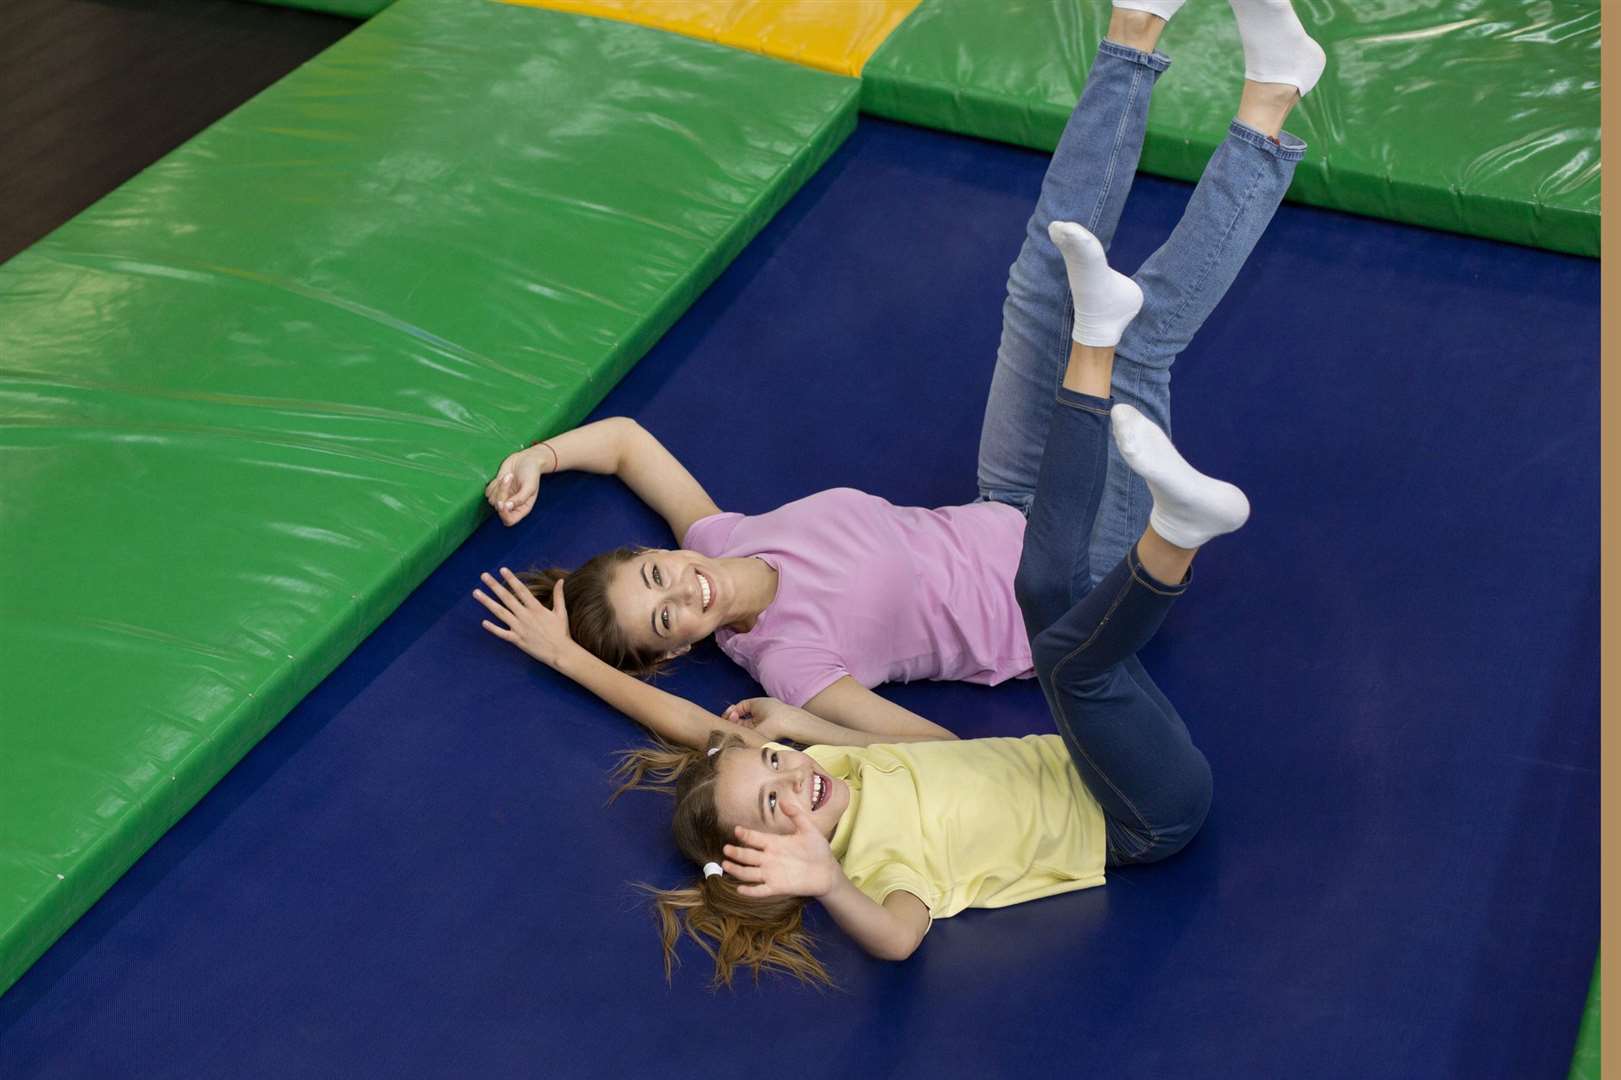 You will be able to go trampolining again